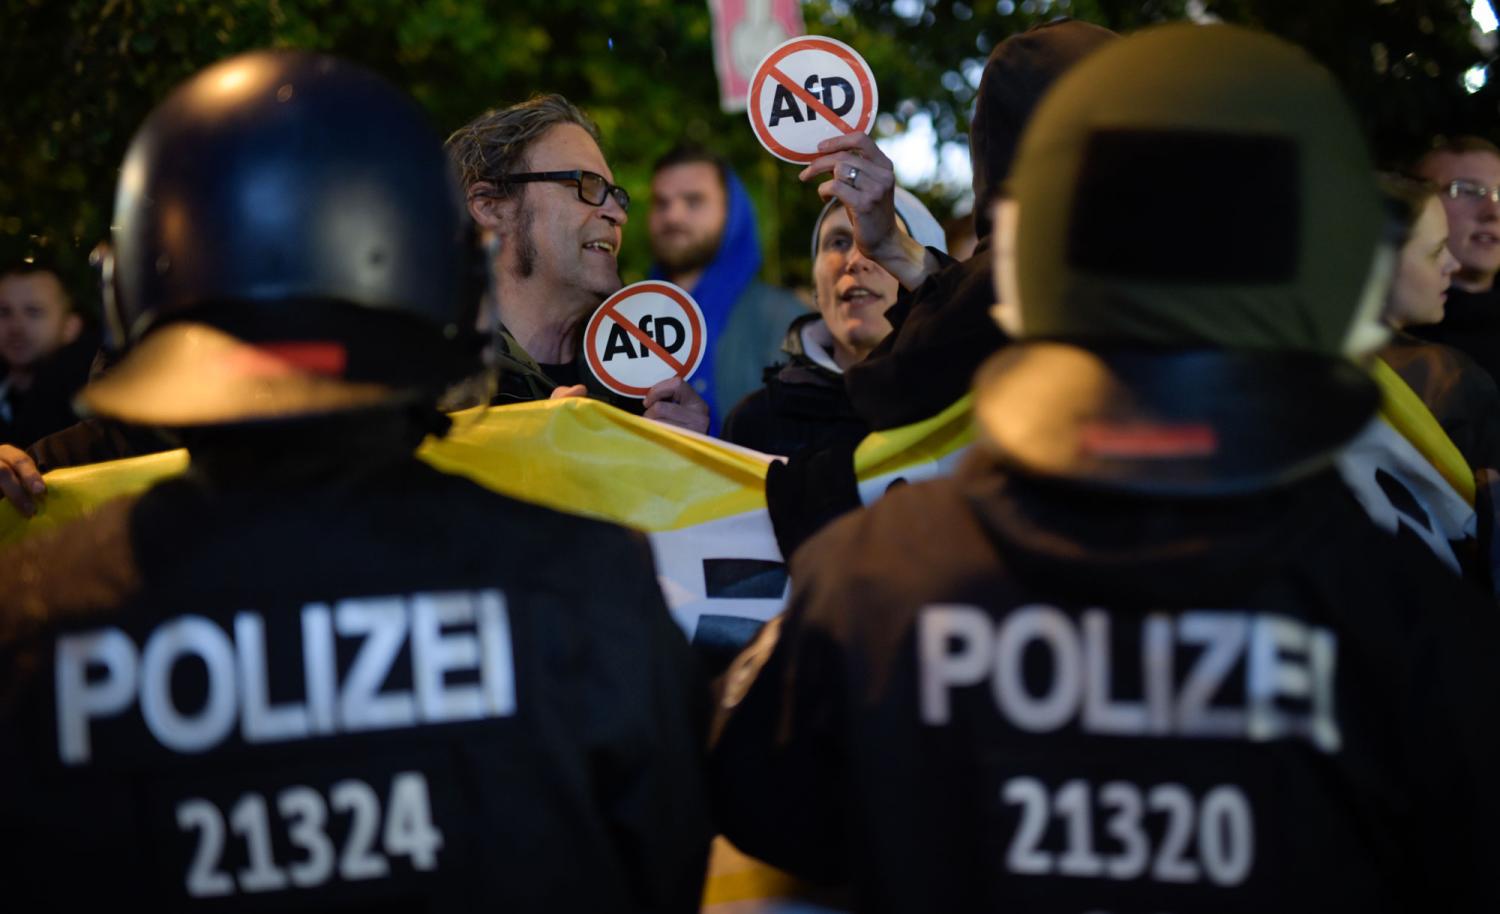 Opponents of the Alternative for Germany (AfD) protest after the German federal elections. Photo by Jens Schlueter/Getty Images